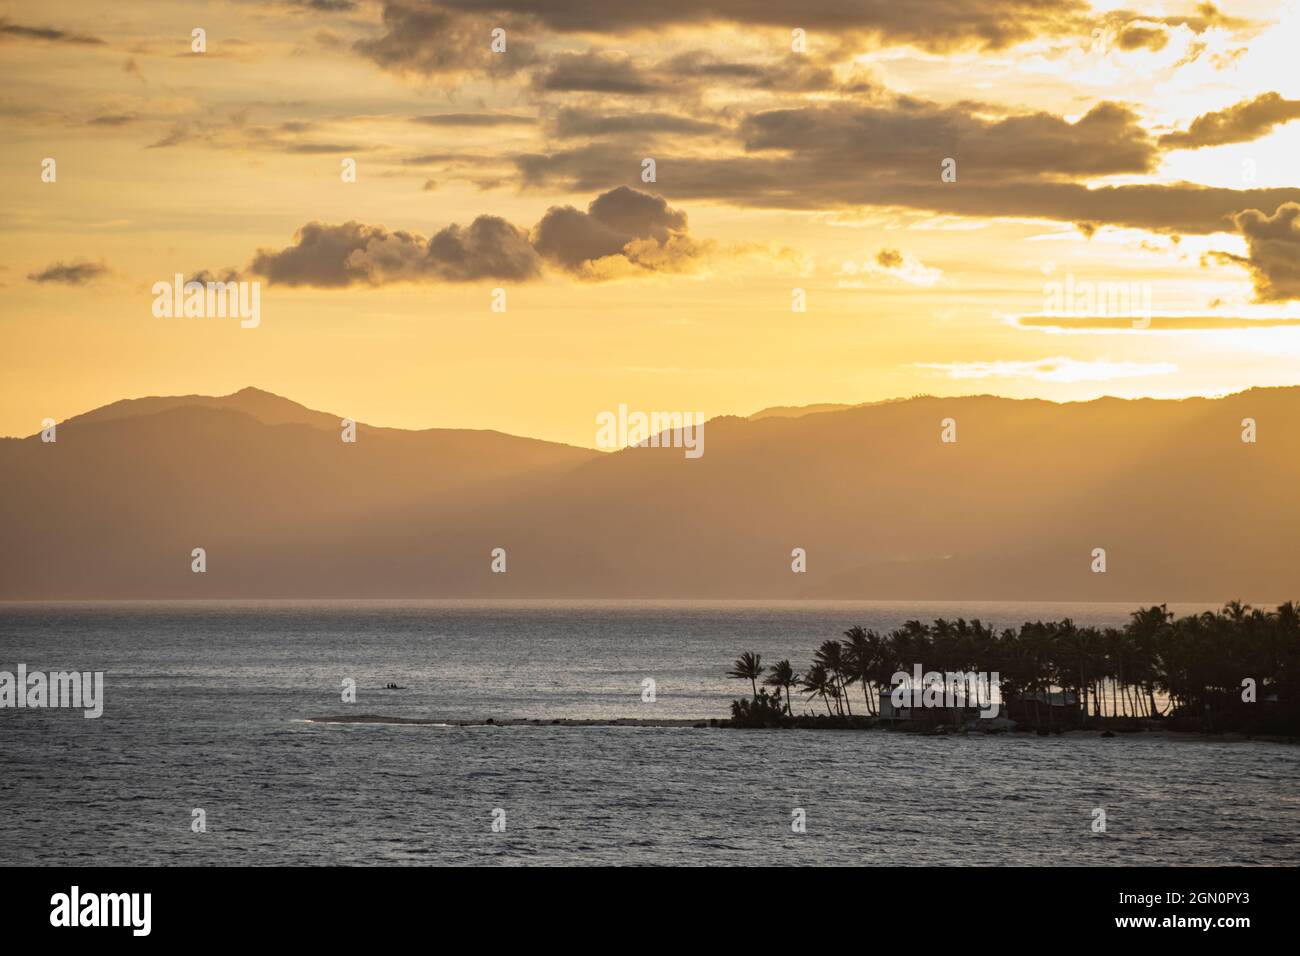 Palm trees on a peninsula with mountains in the distance at sunset, Barangay I, Romblon, Romblon, Philippines, Asia Stock Photo